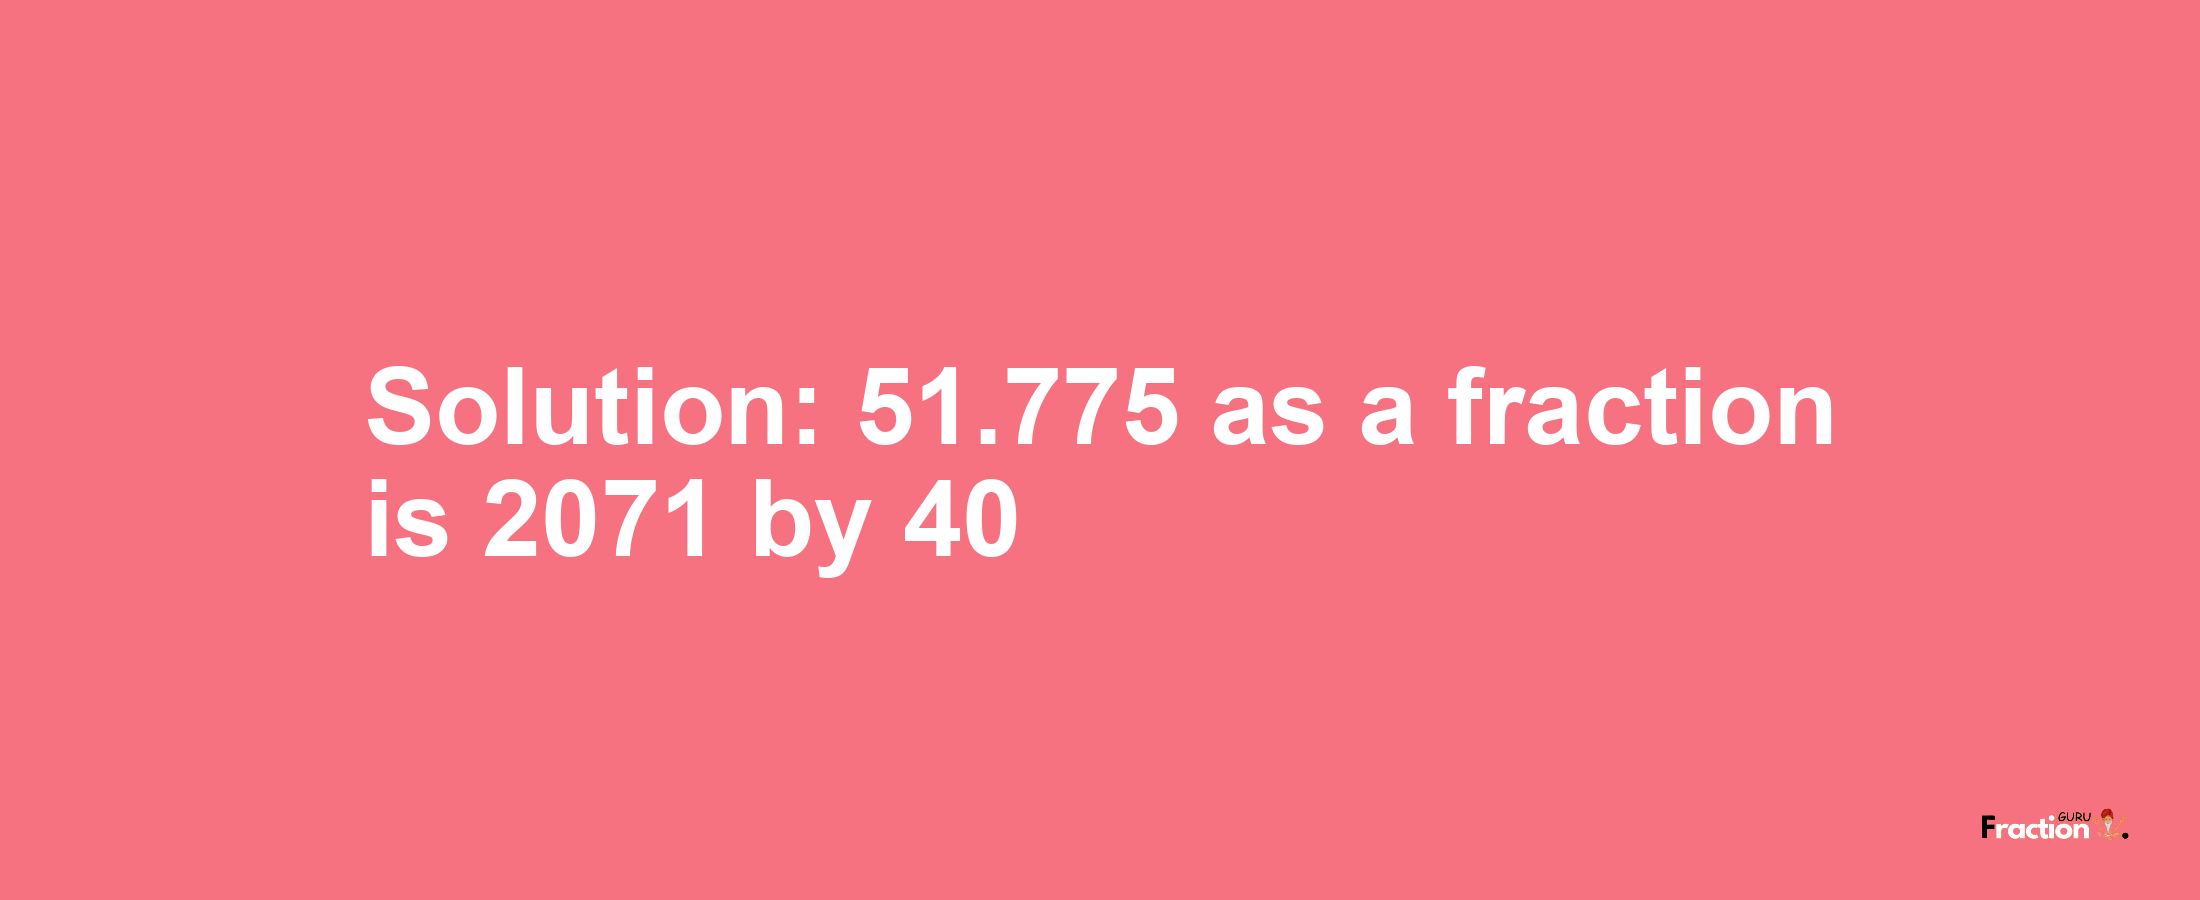 Solution:51.775 as a fraction is 2071/40